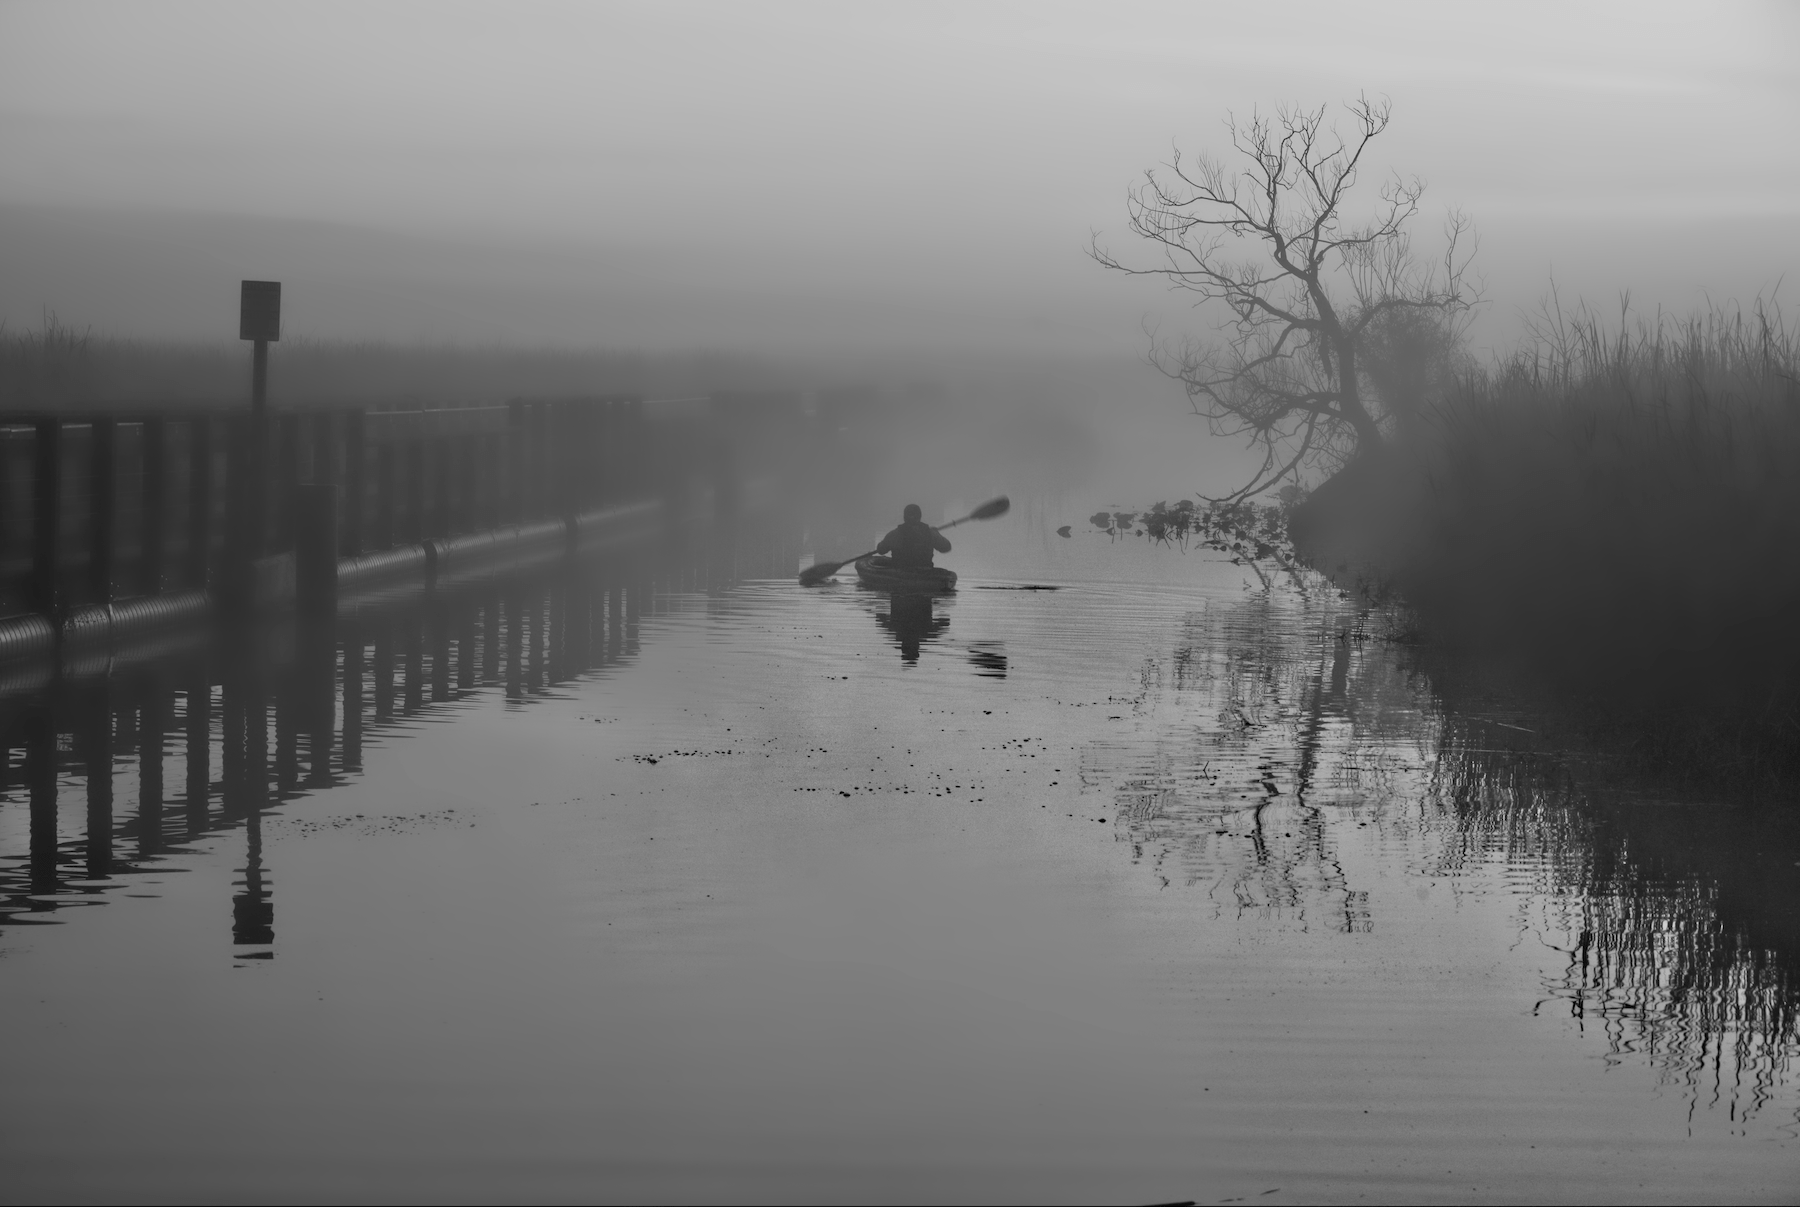 a kayaker padding away into a goggy cold morning